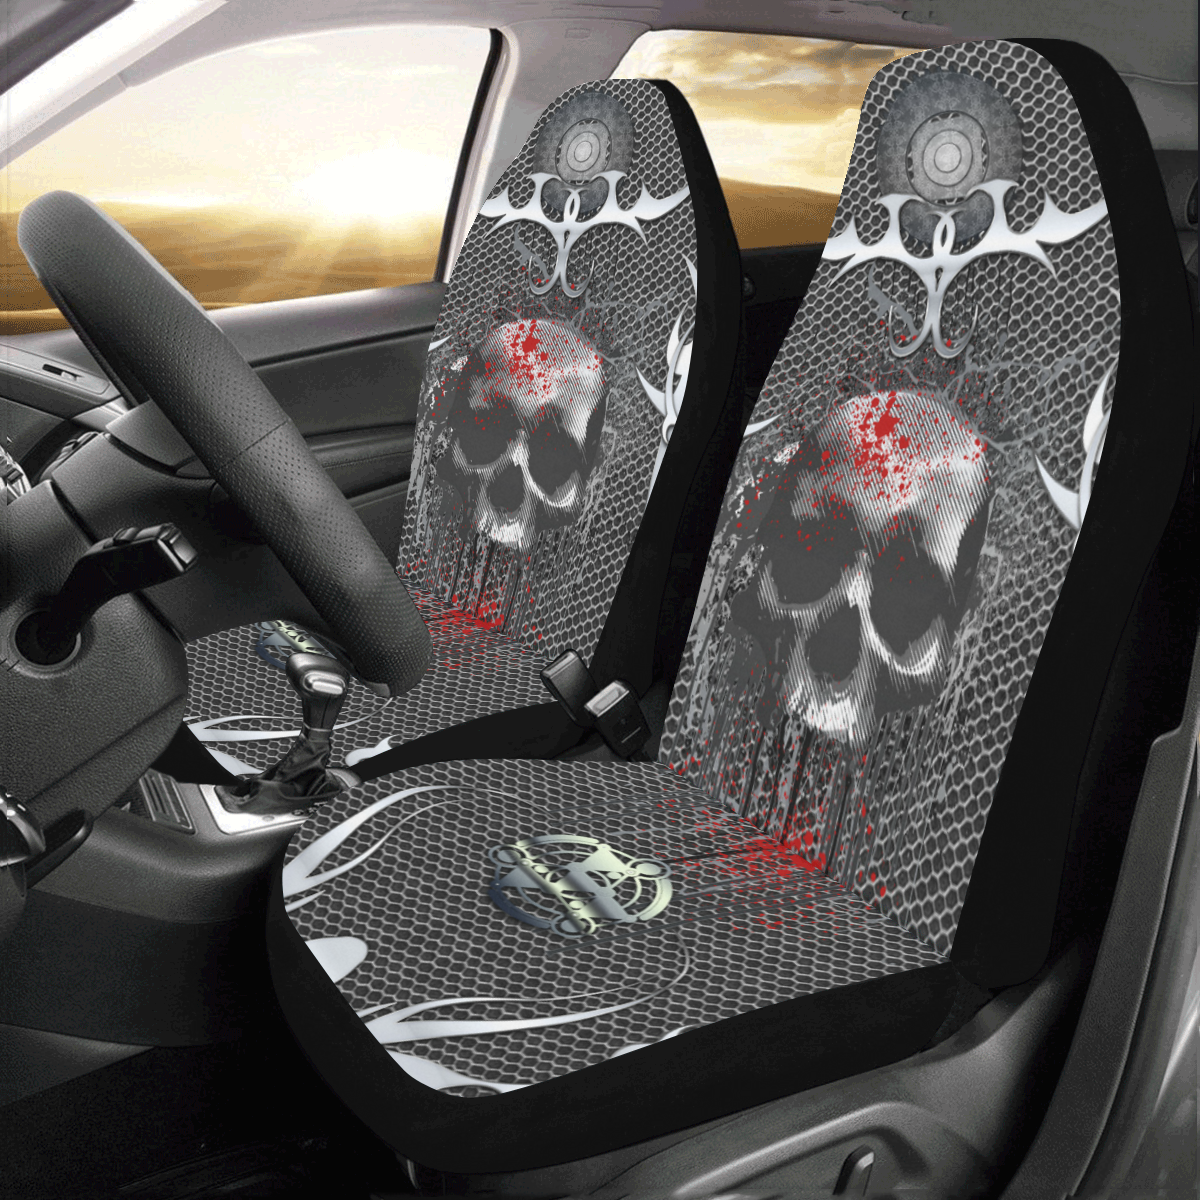 Awesome skull on metal design Car Seat Covers (Set of 2)